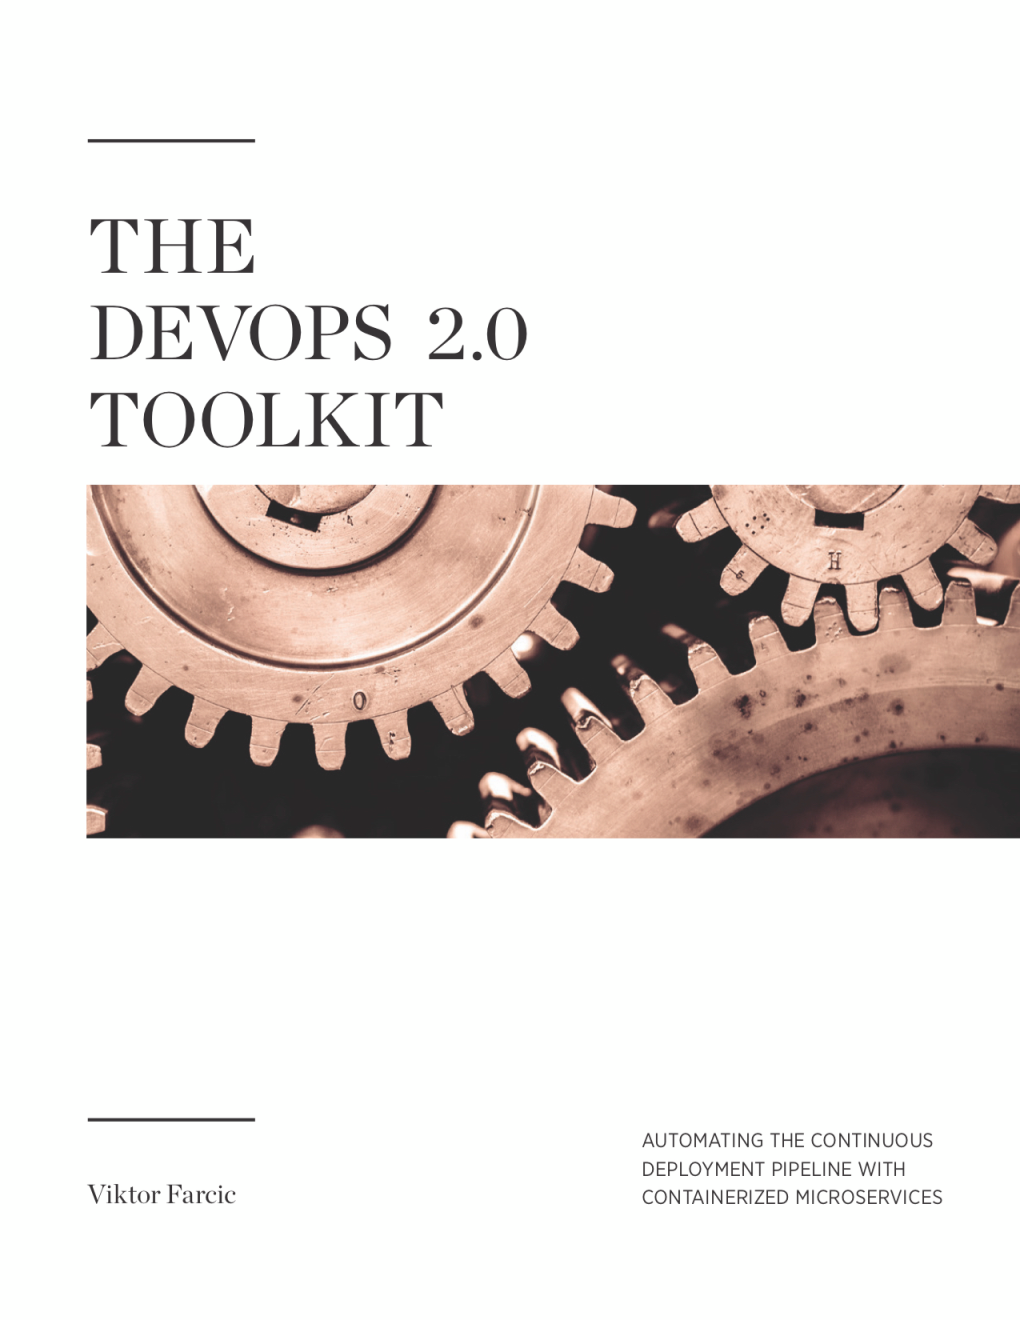 The Devops 2.0 Toolkit Automating the Continuous Deployment Pipeline with Containerized Microservices